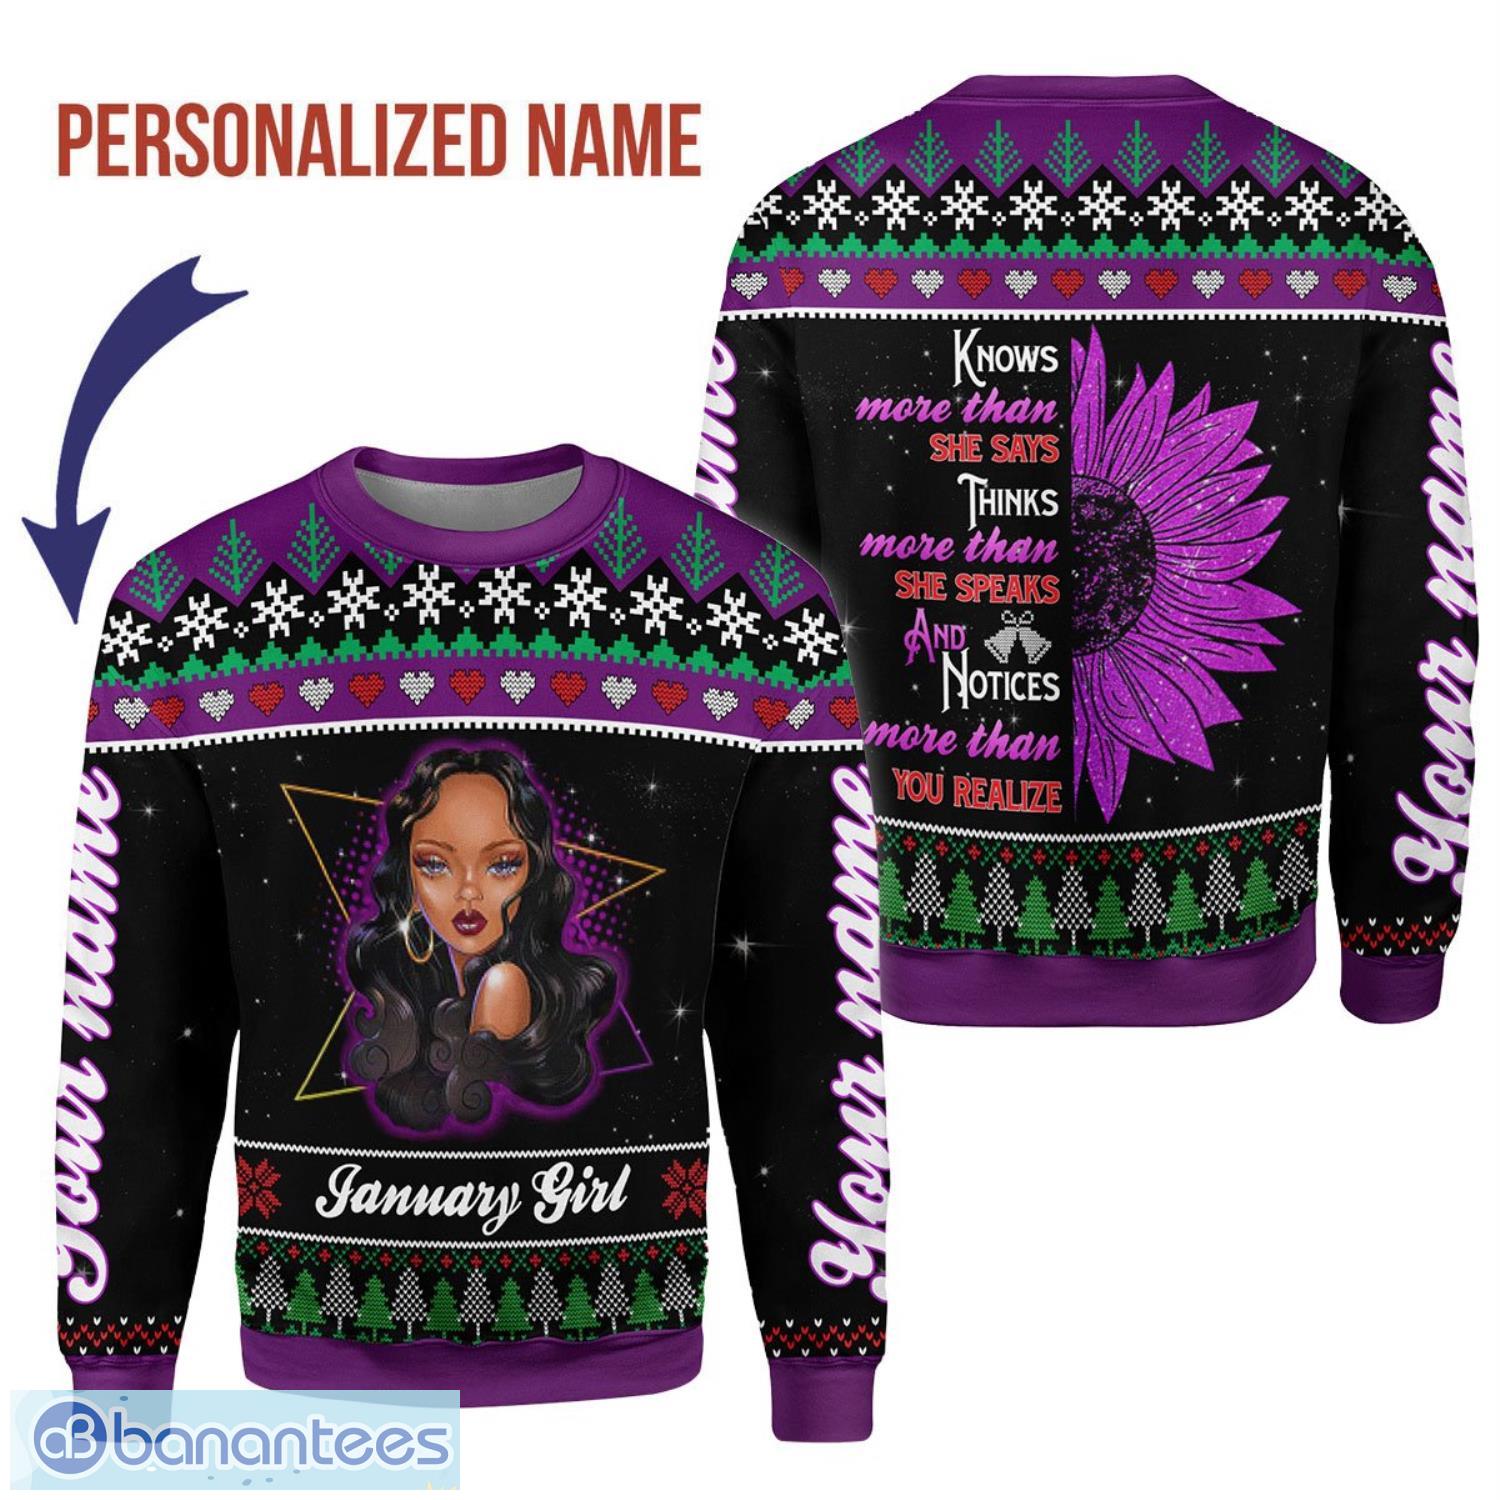 Personalized Name January Girl Knows More Than She Says 3D Ugly Christmas Sweater Christmas Gift Product Photo 1